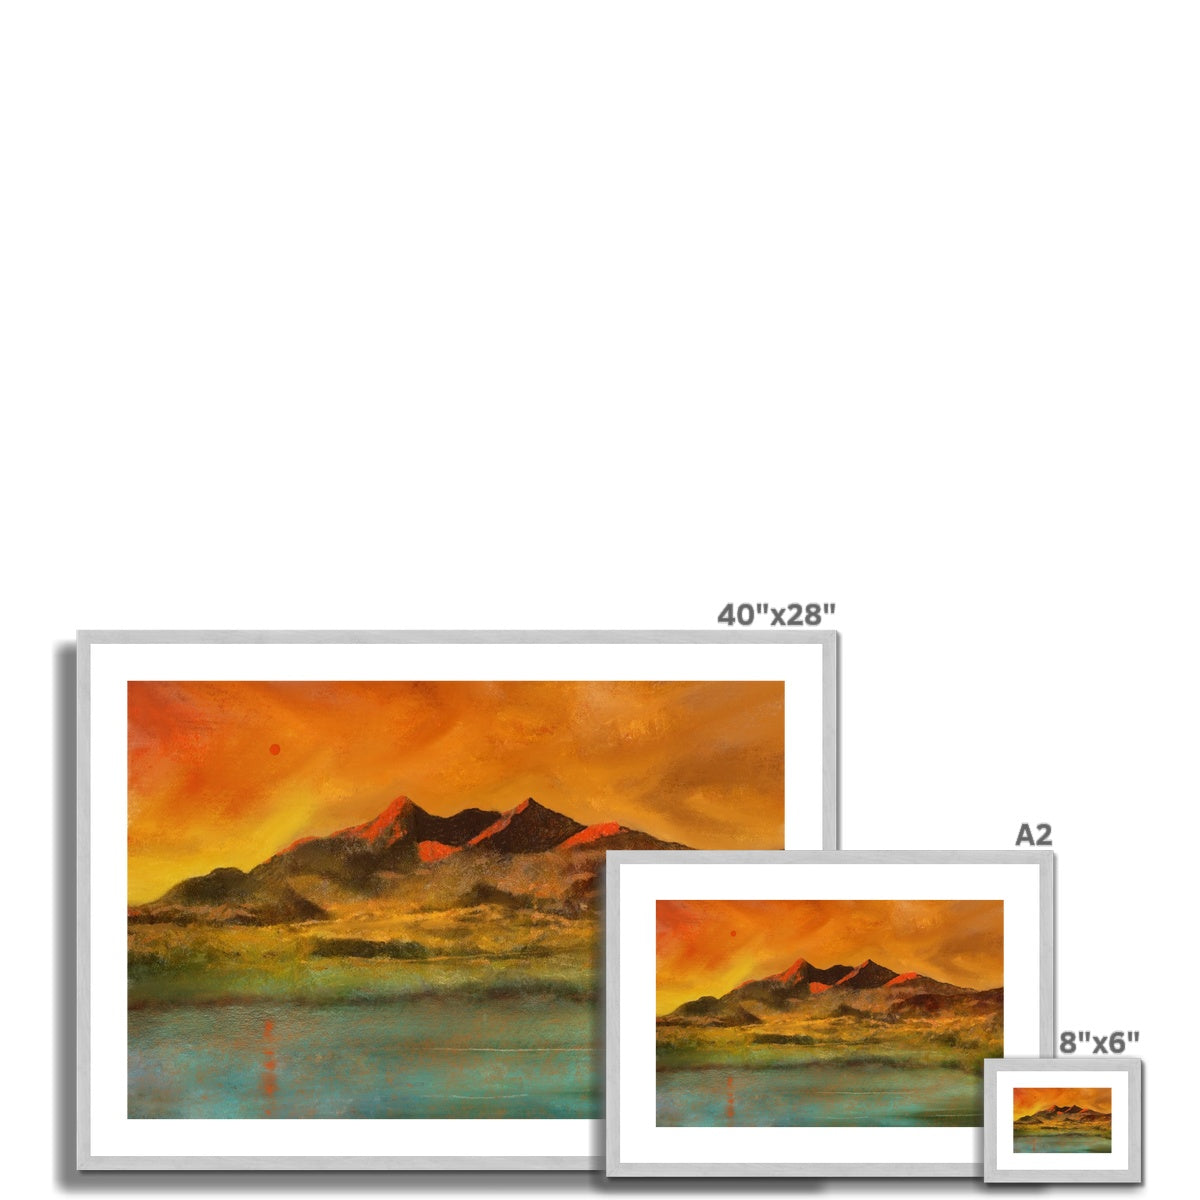 Skye Red Moon Cuillin Painting | Antique Framed & Mounted Prints From Scotland-Antique Framed & Mounted Prints-Skye Art Gallery-Paintings, Prints, Homeware, Art Gifts From Scotland By Scottish Artist Kevin Hunter